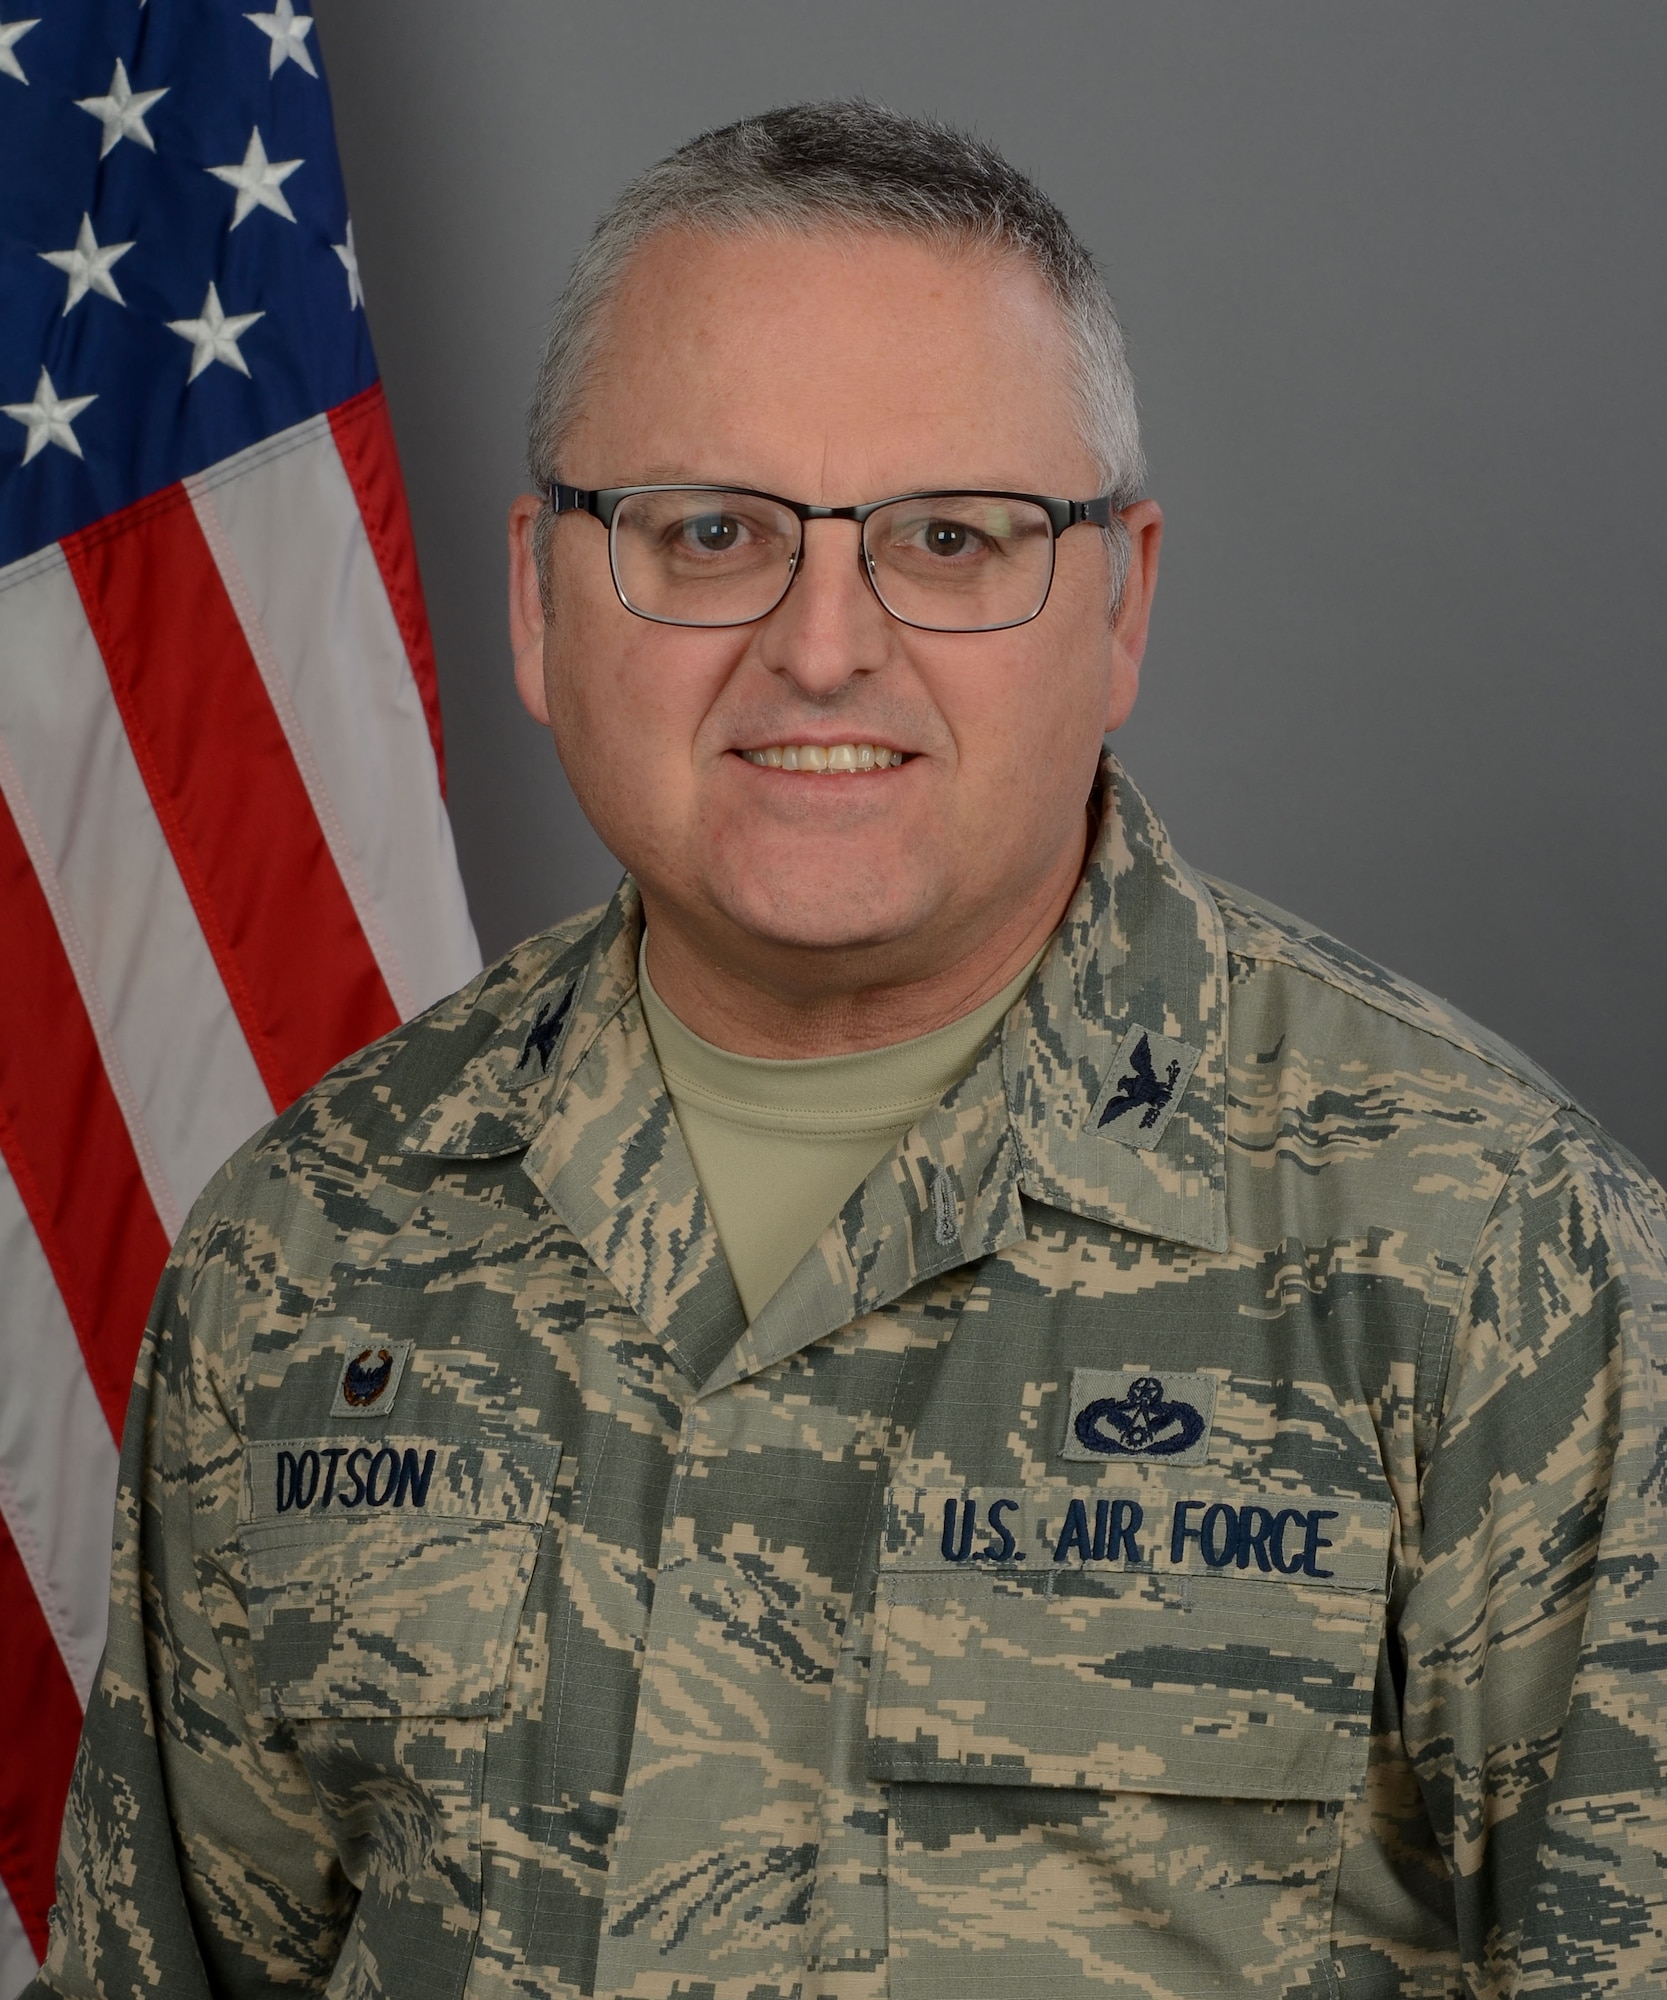 U.S. Air Force Col. Tim Dotson, the commander of the 169th Mission Support Group, at McEntire Joint National Guard Base, S.C., Feb. 1, 2018.  (U.S. Air National Guard photo by Senior Airman Megan Floyd)